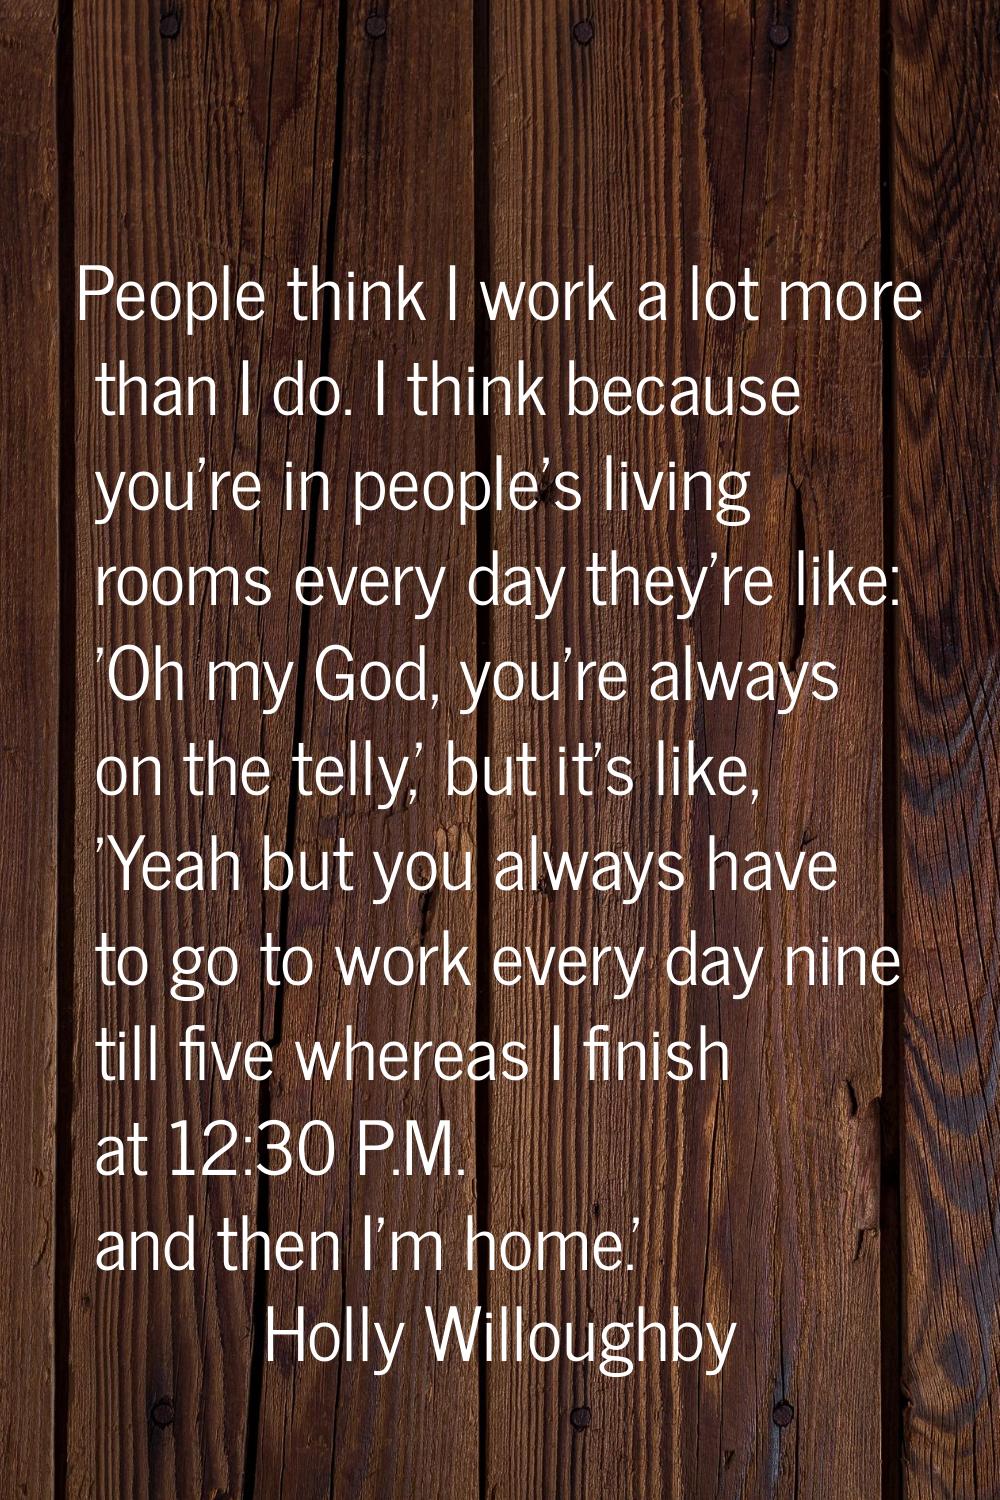 People think I work a lot more than I do. I think because you're in people's living rooms every day